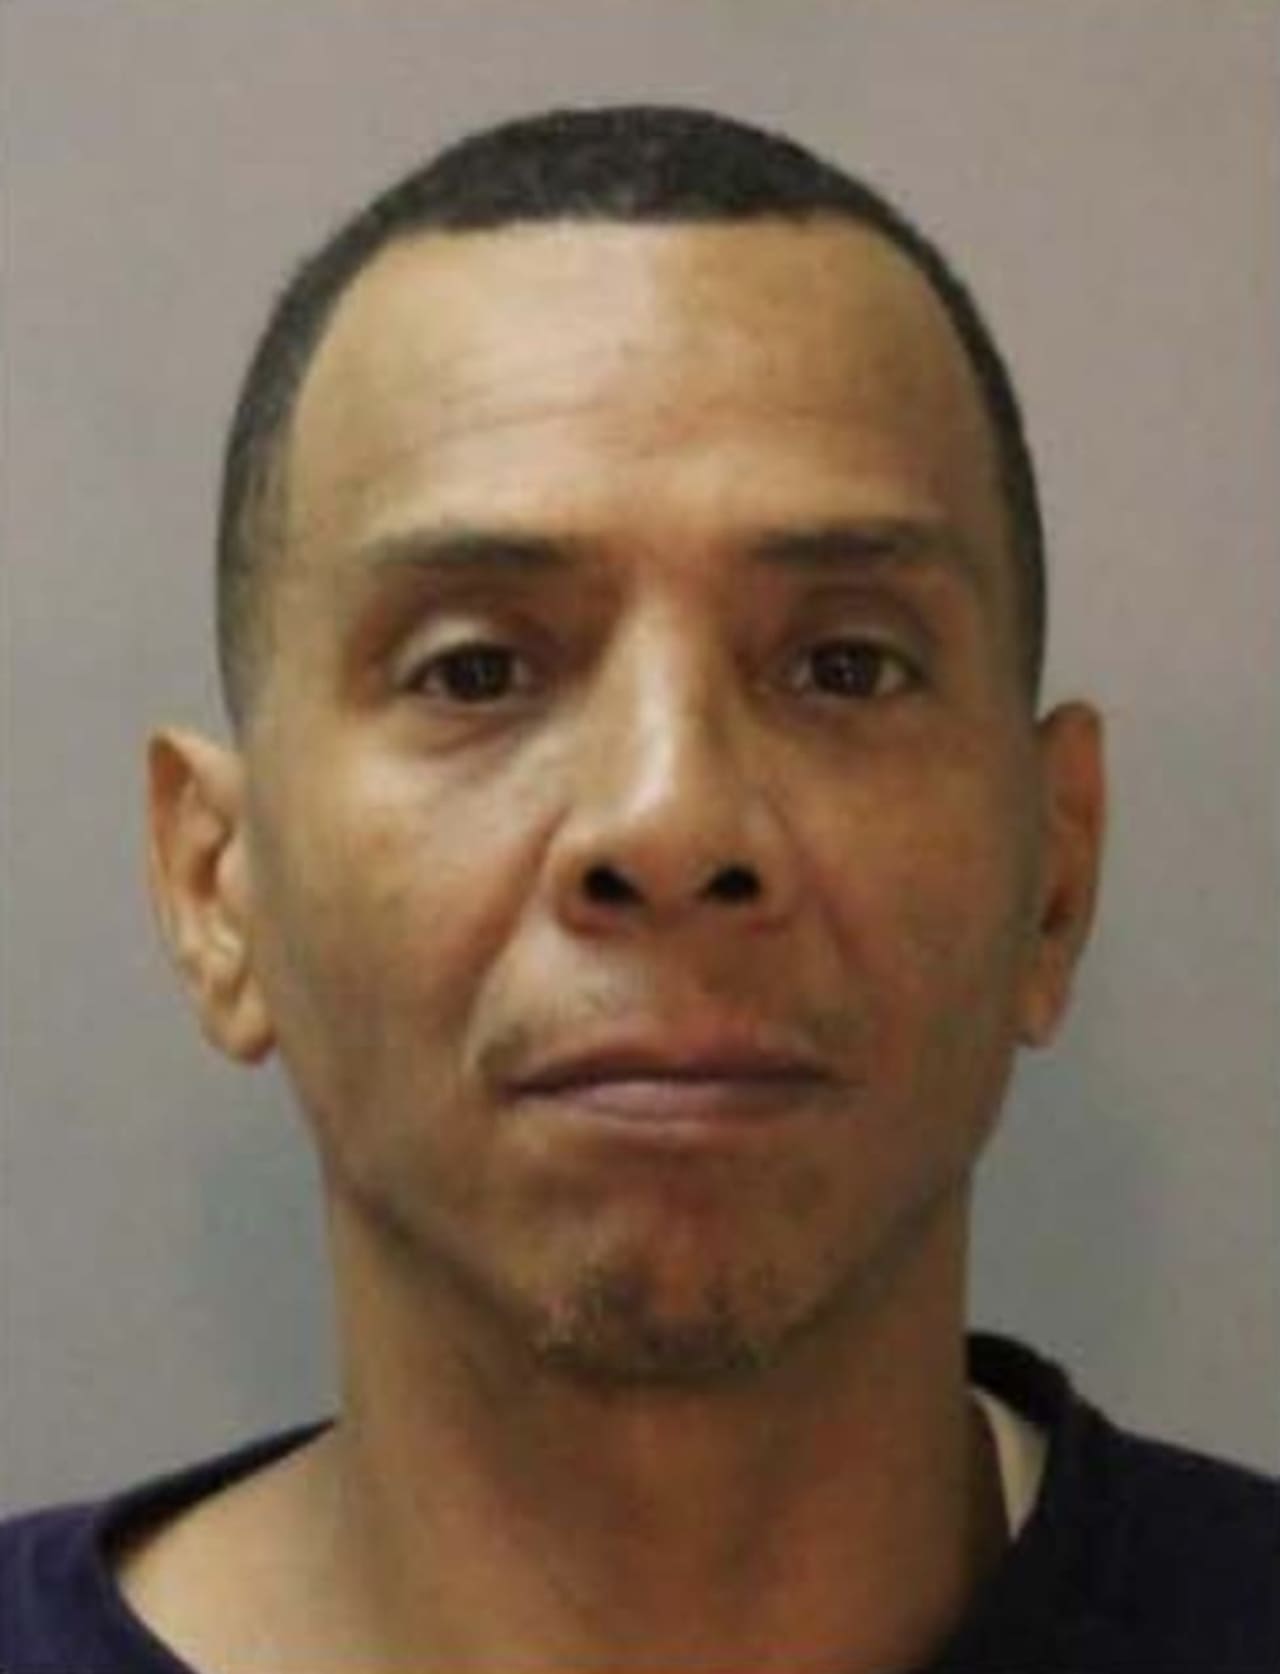 Alexander Saldana is wanted by New York State Police and the Orange County Court.